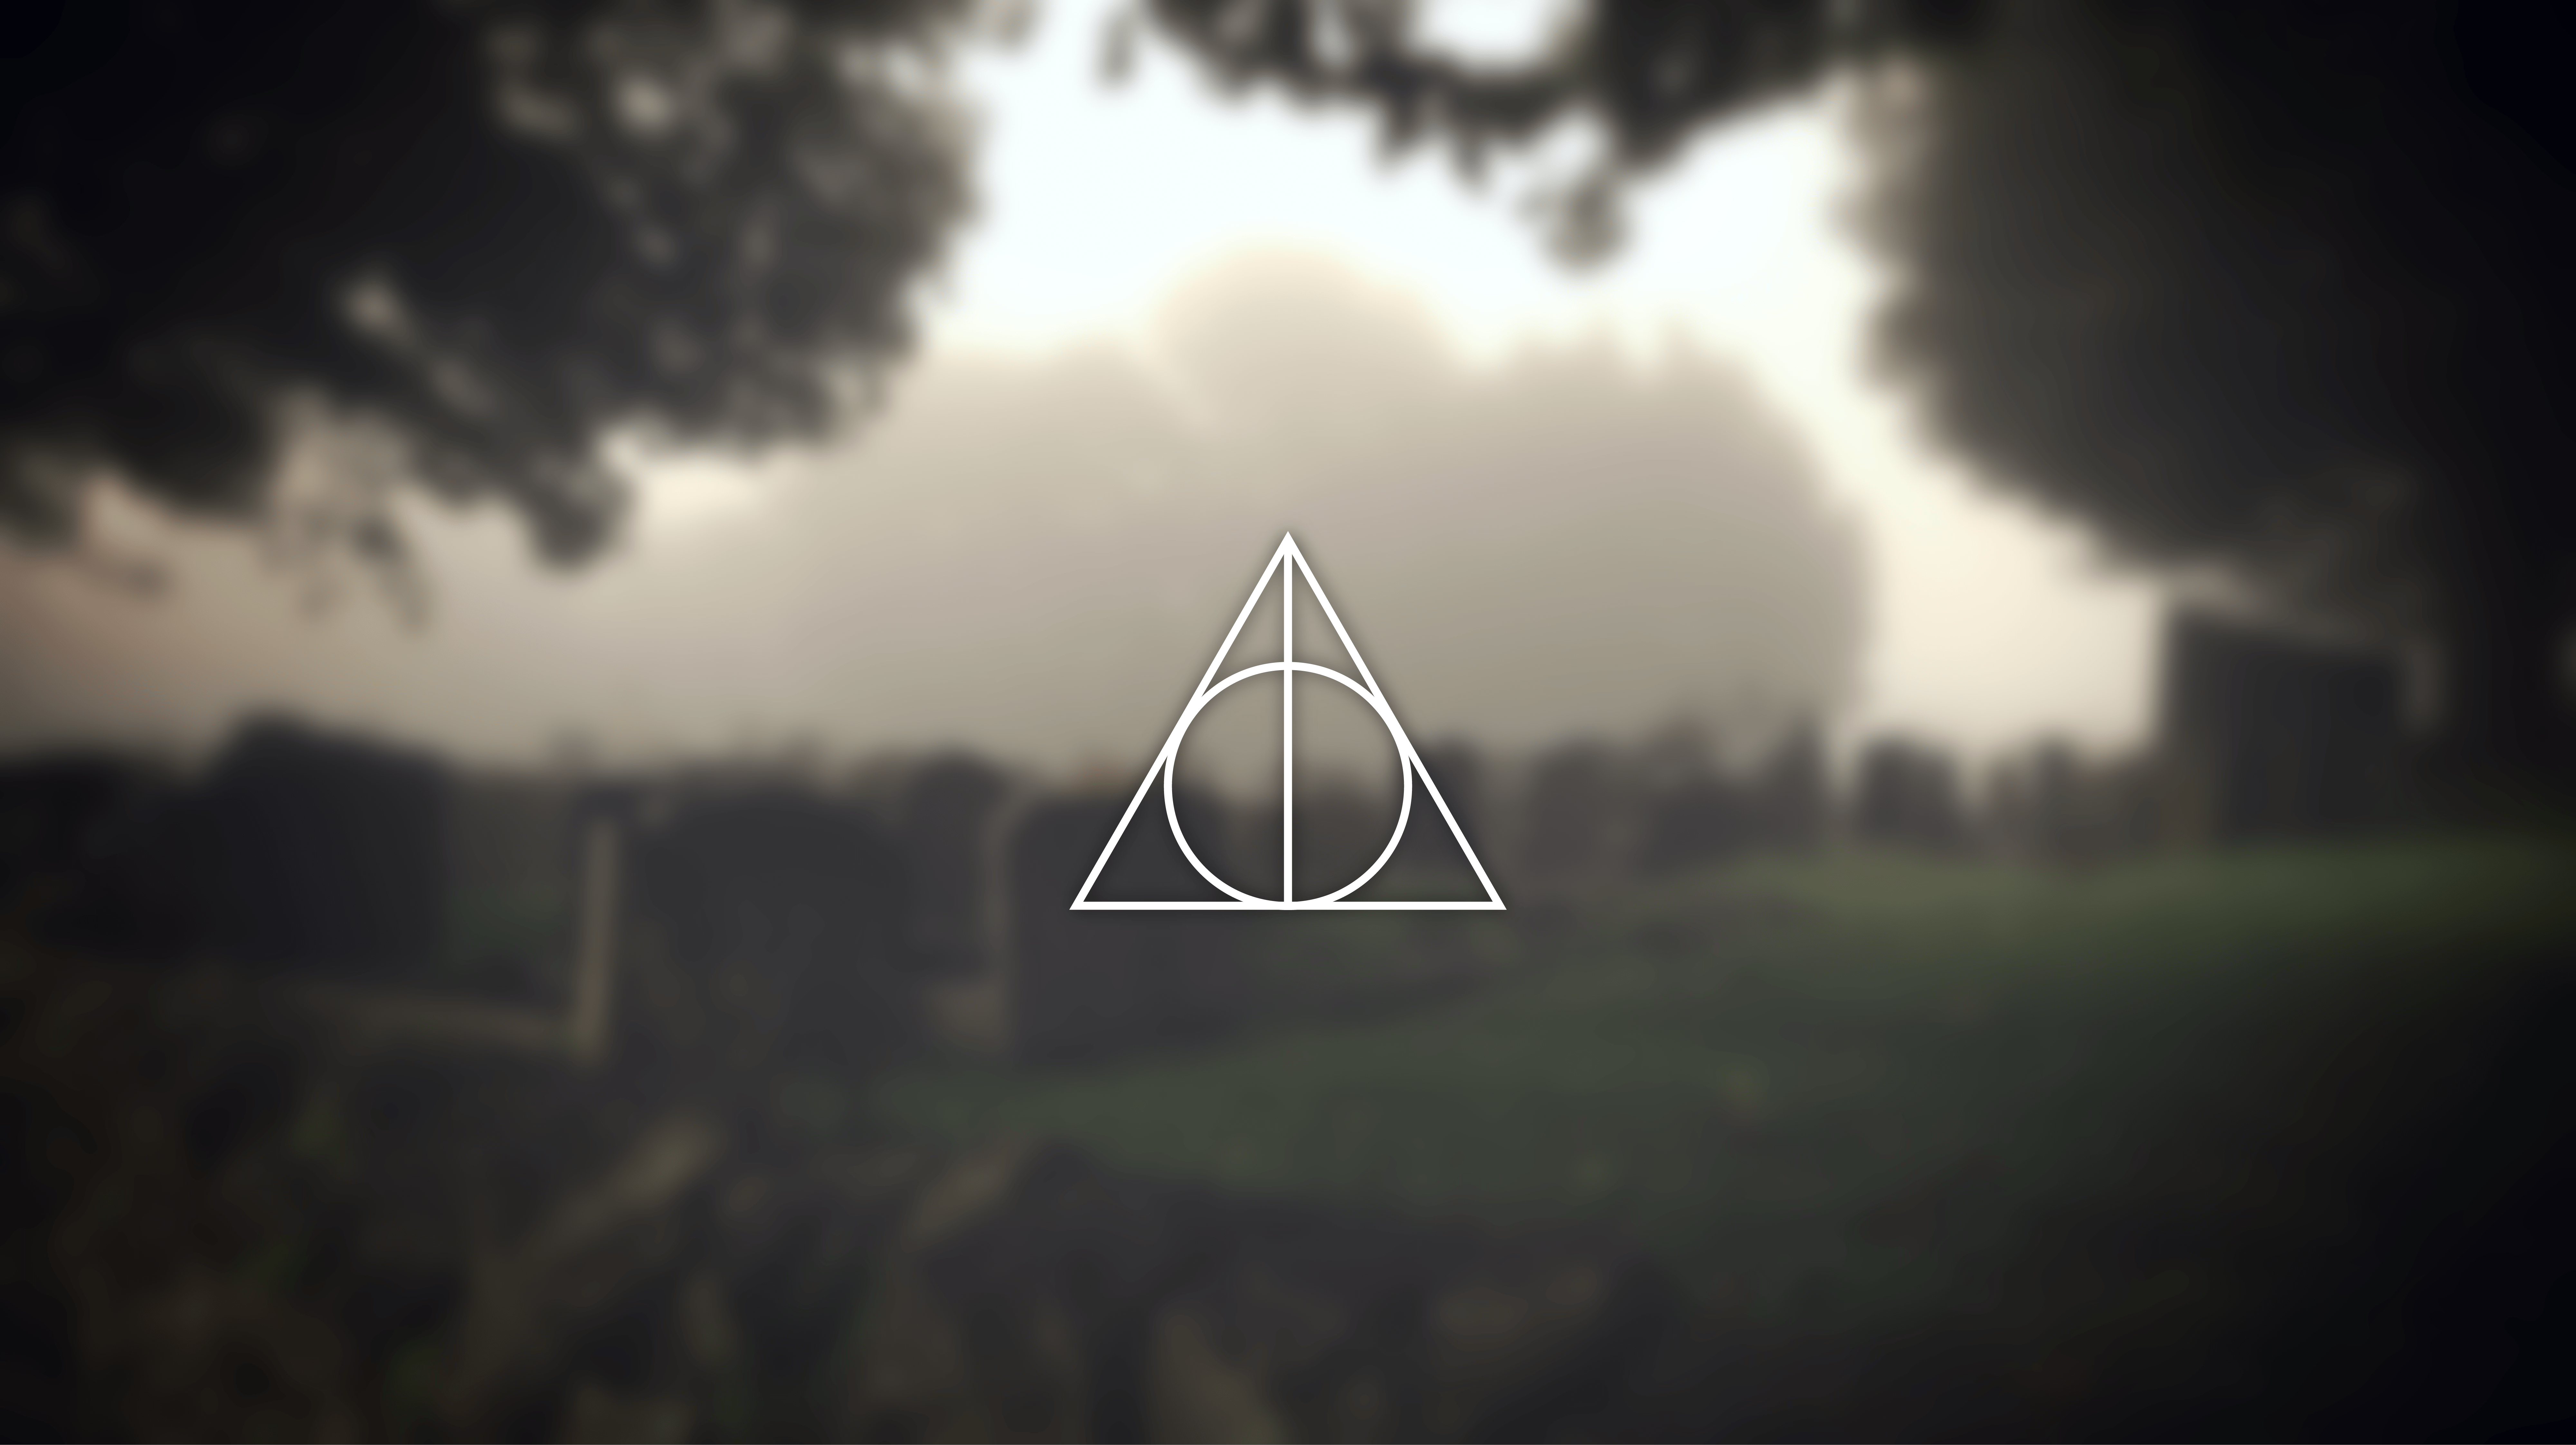 Deathly Hallows Wallpaper Free Deathly Hallows Background